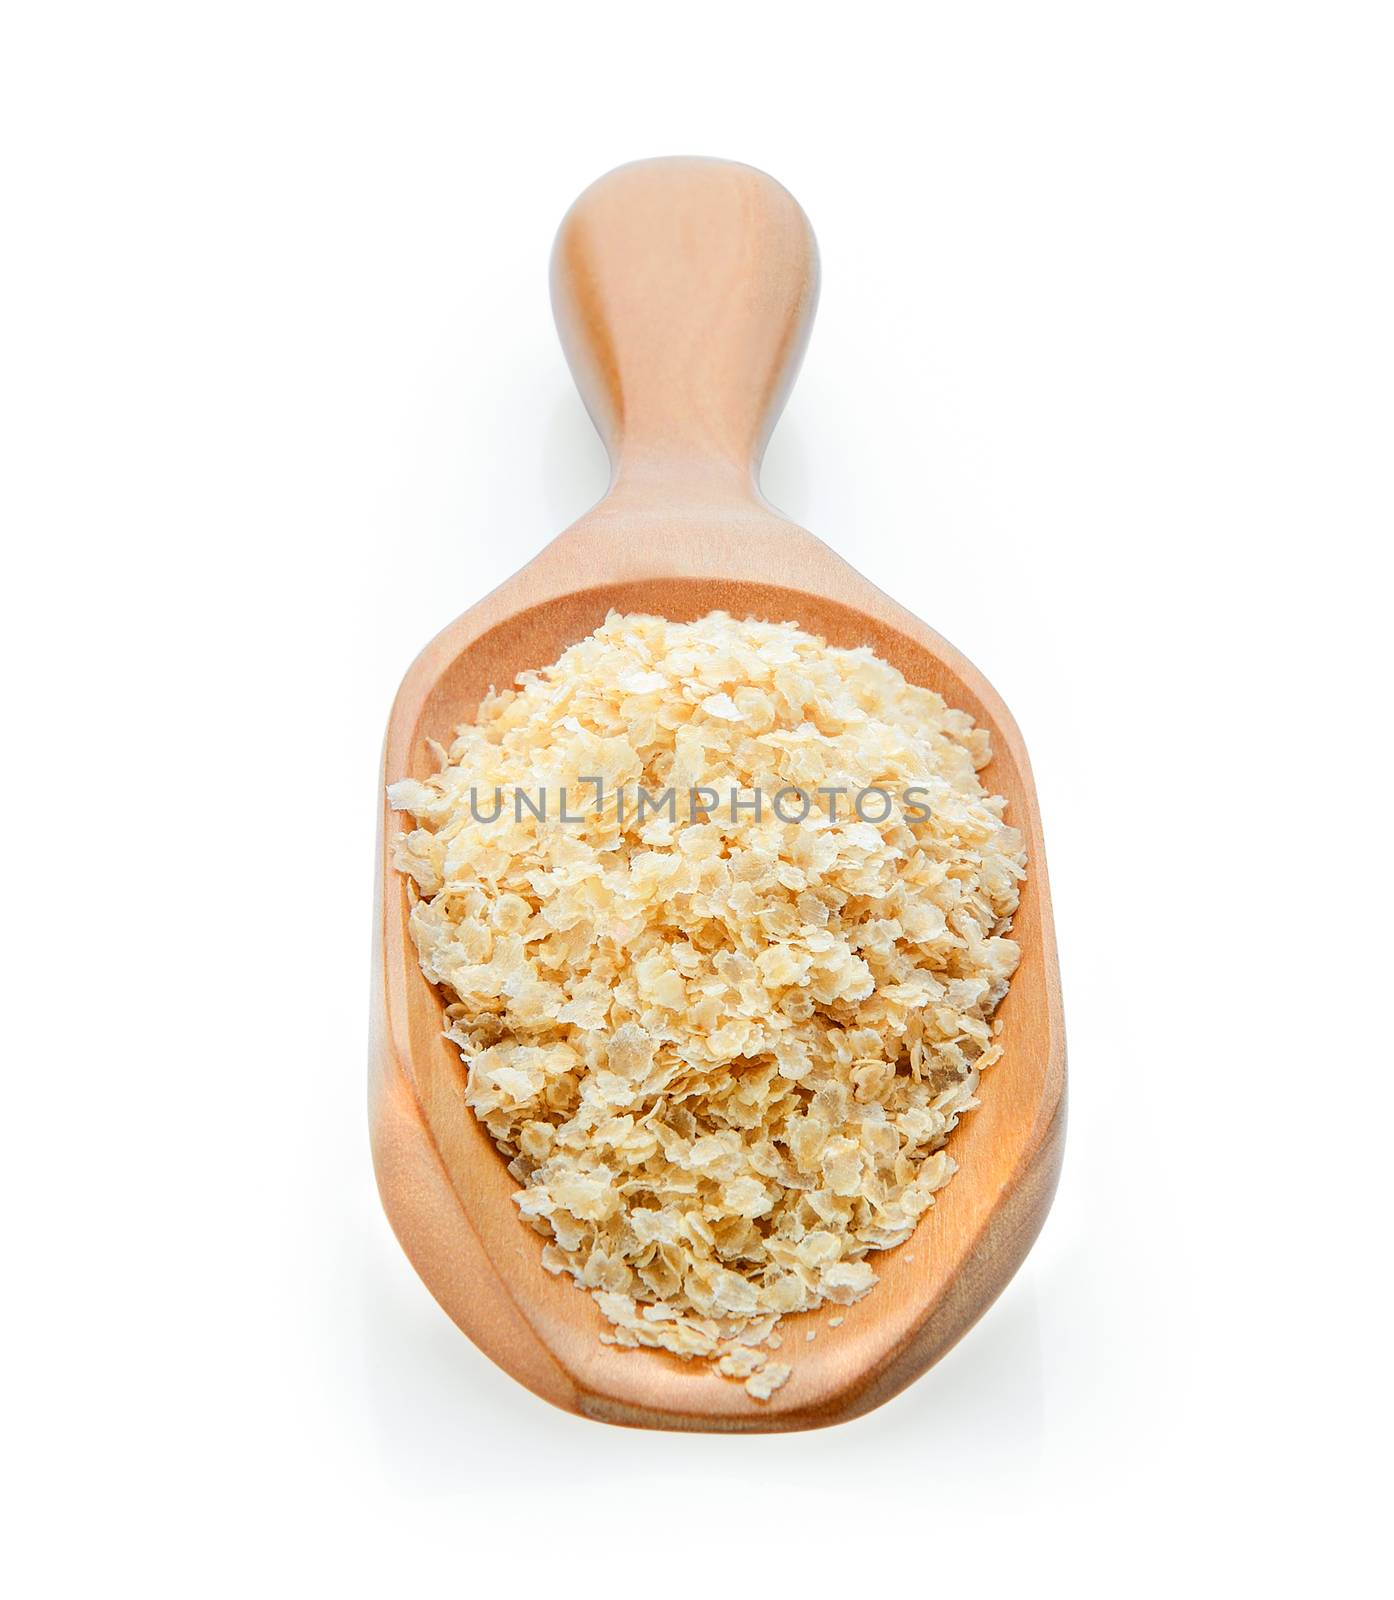 amaranth seeds on wooden scoop over white background